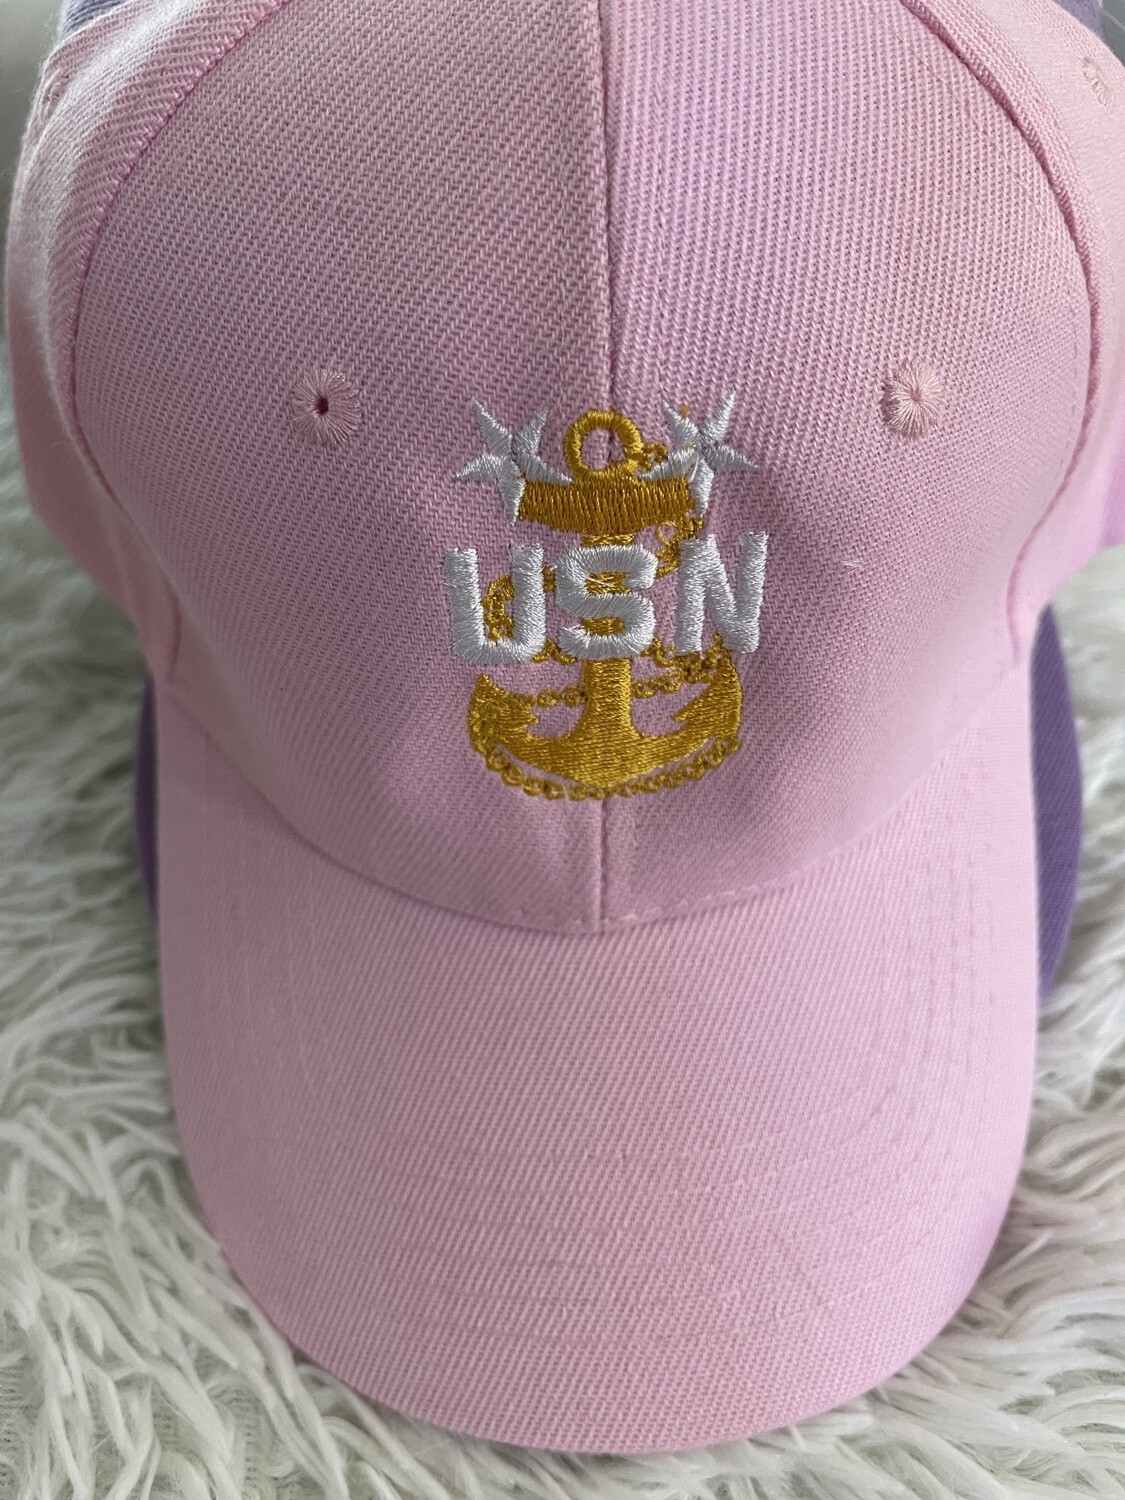 Pink Embroidered ❤️ LADIES PONYTAIL MID PROFILE VINTAGE FOAM FRONT MESH POLYESTER BACK TRUCKER HATS 🧢 Please allow 4-6 business days to ship once the order is placed.